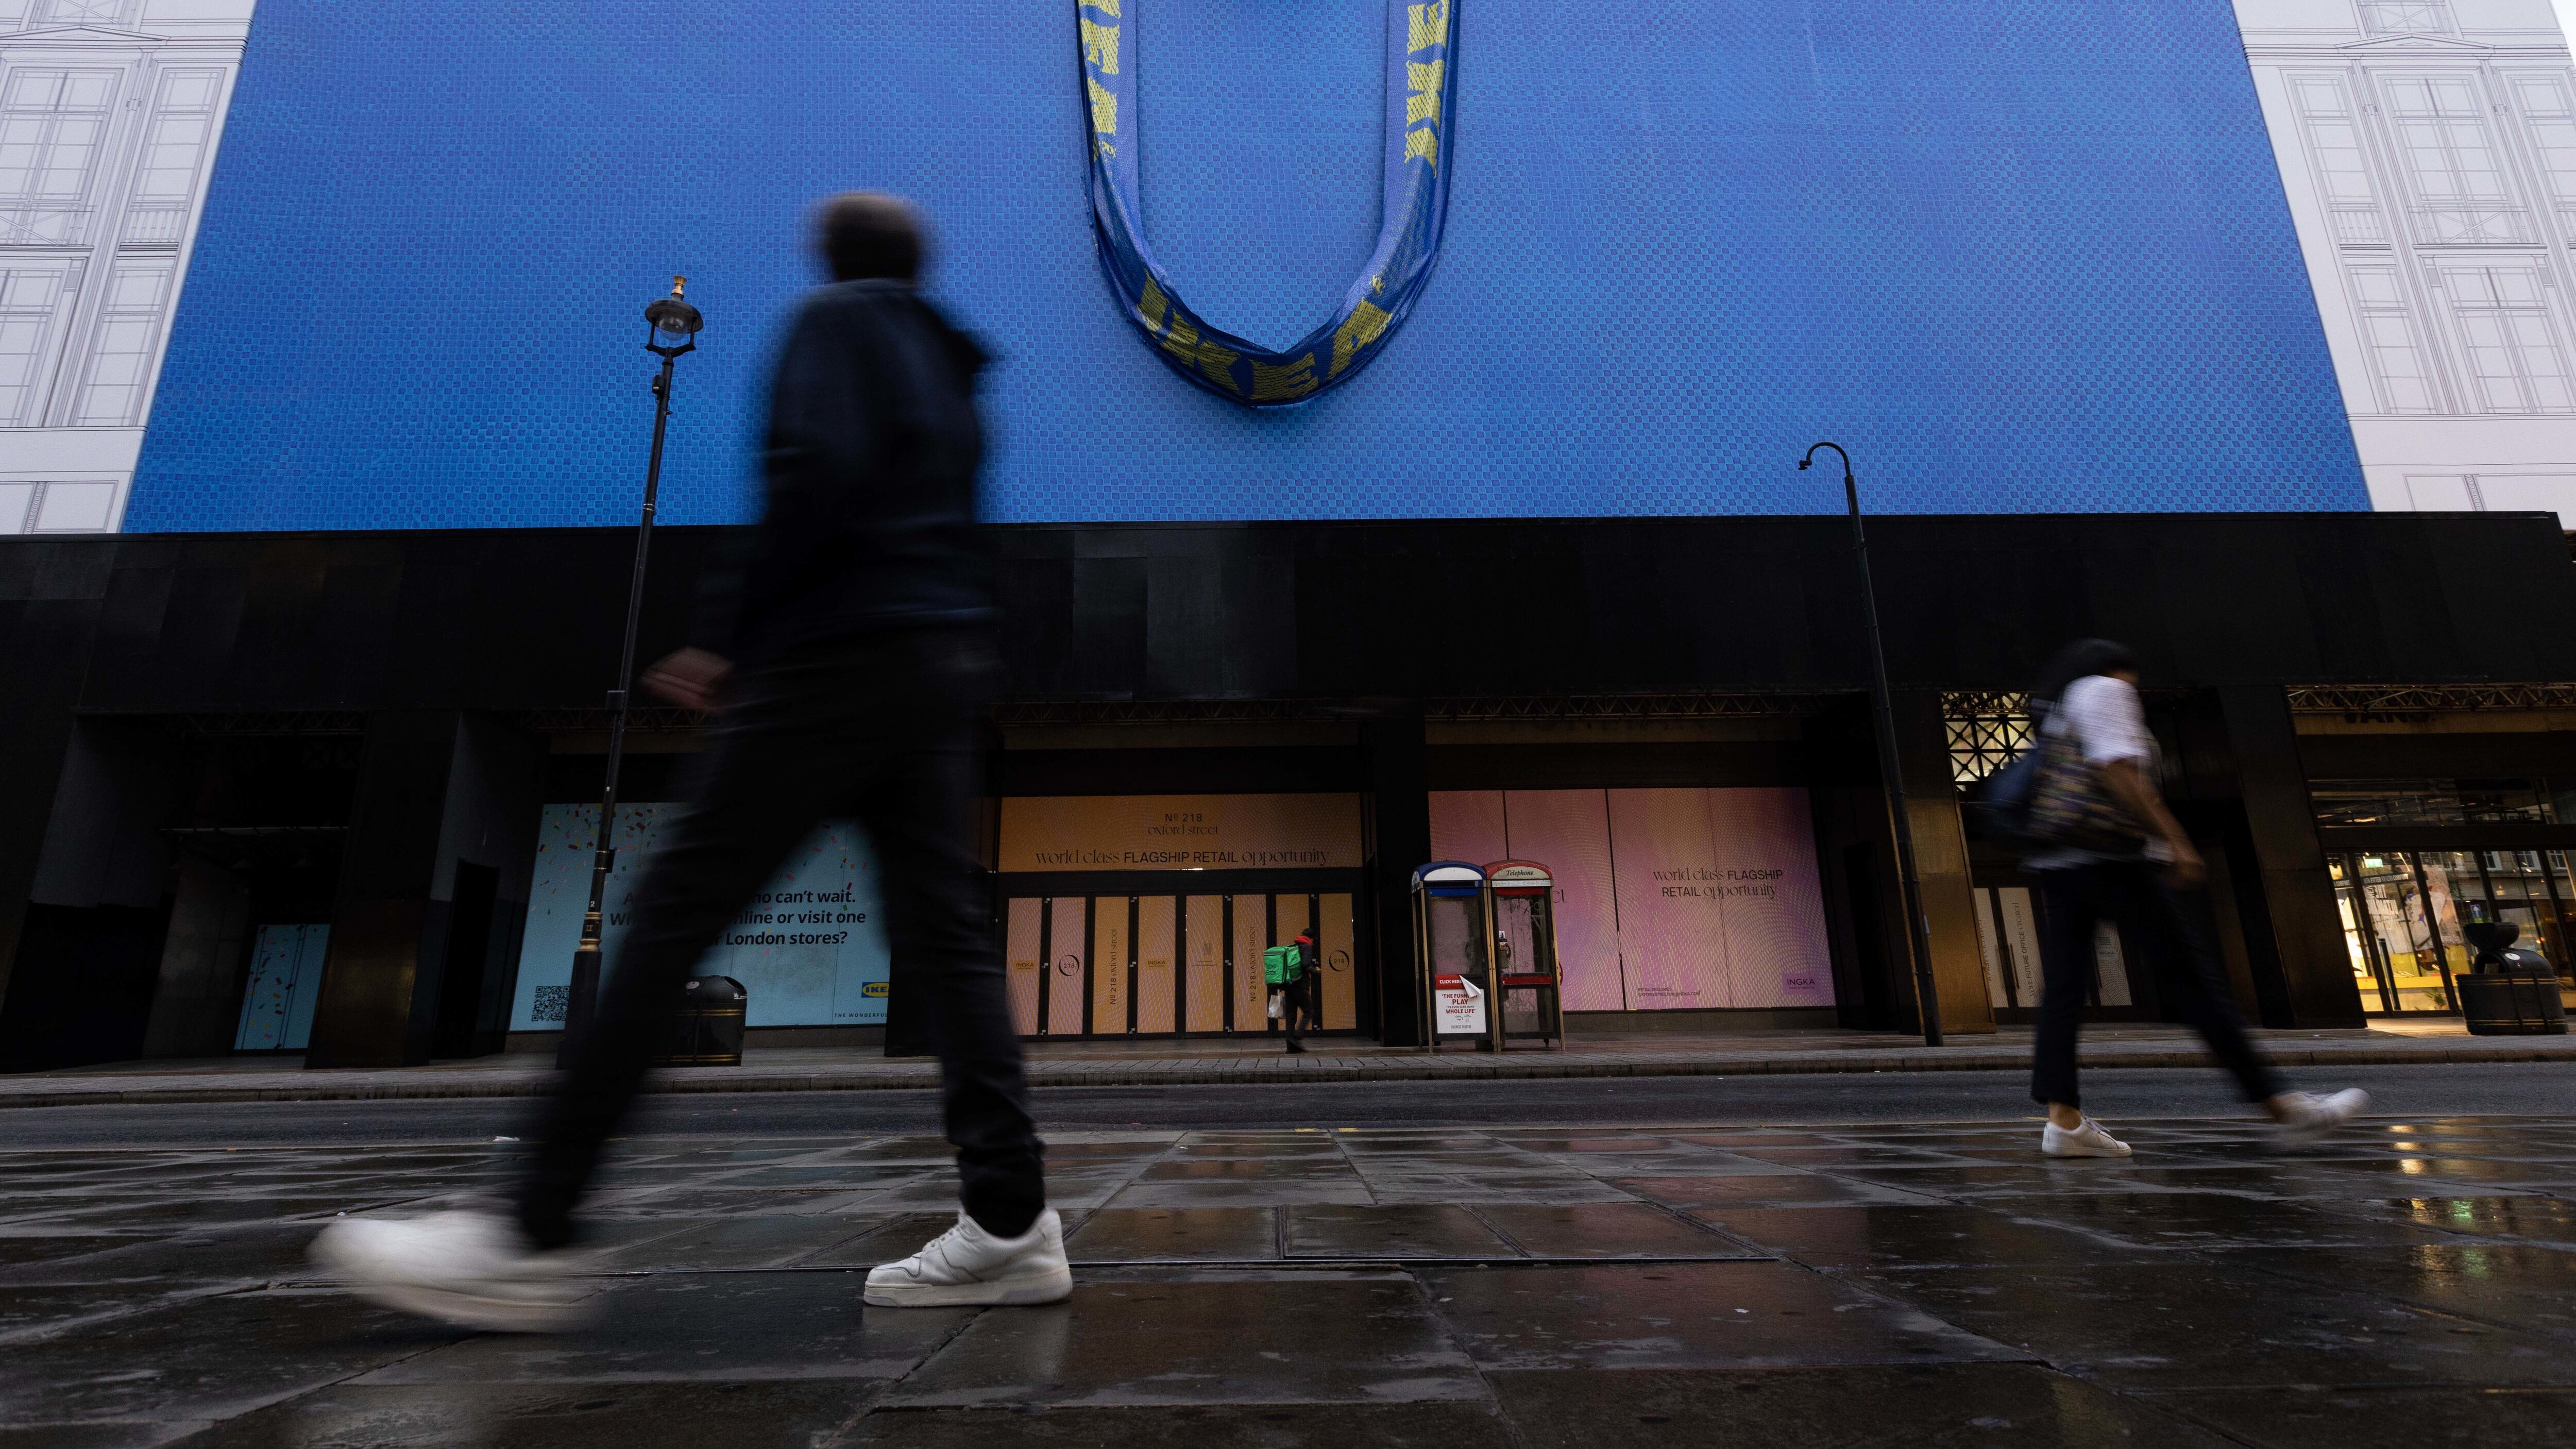 The Ikea Oxford Street city store in London, that is currently under renovation